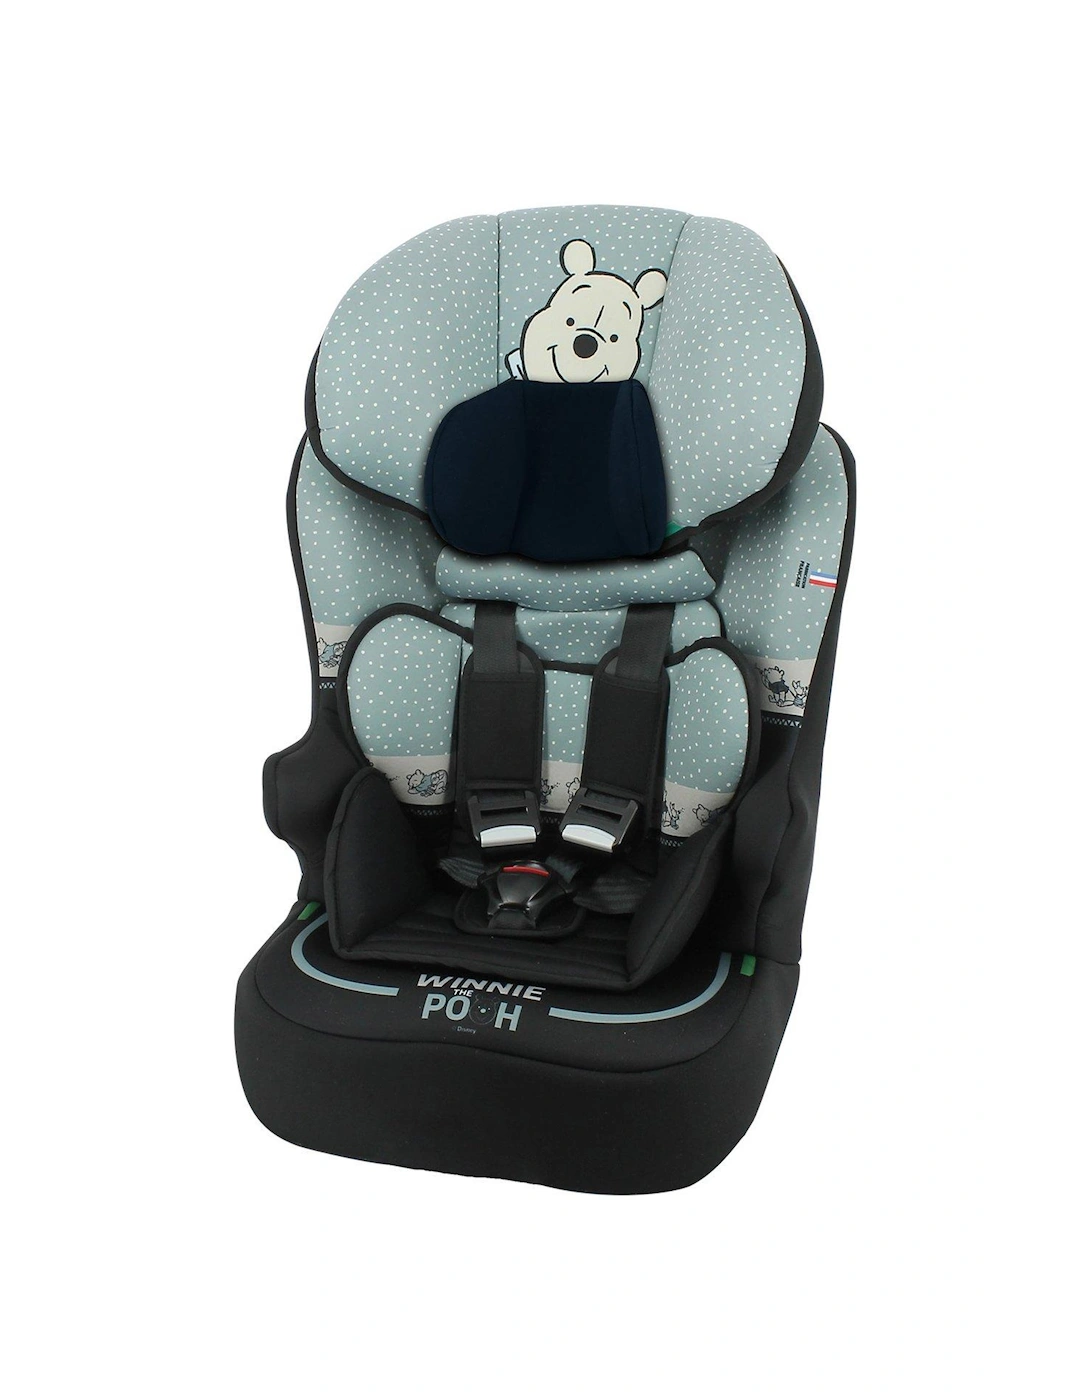 Winnie The Pooh Race I Belt fitted 76-140cm (9 months to 12 years) High Back Booster Car Seat, 2 of 1